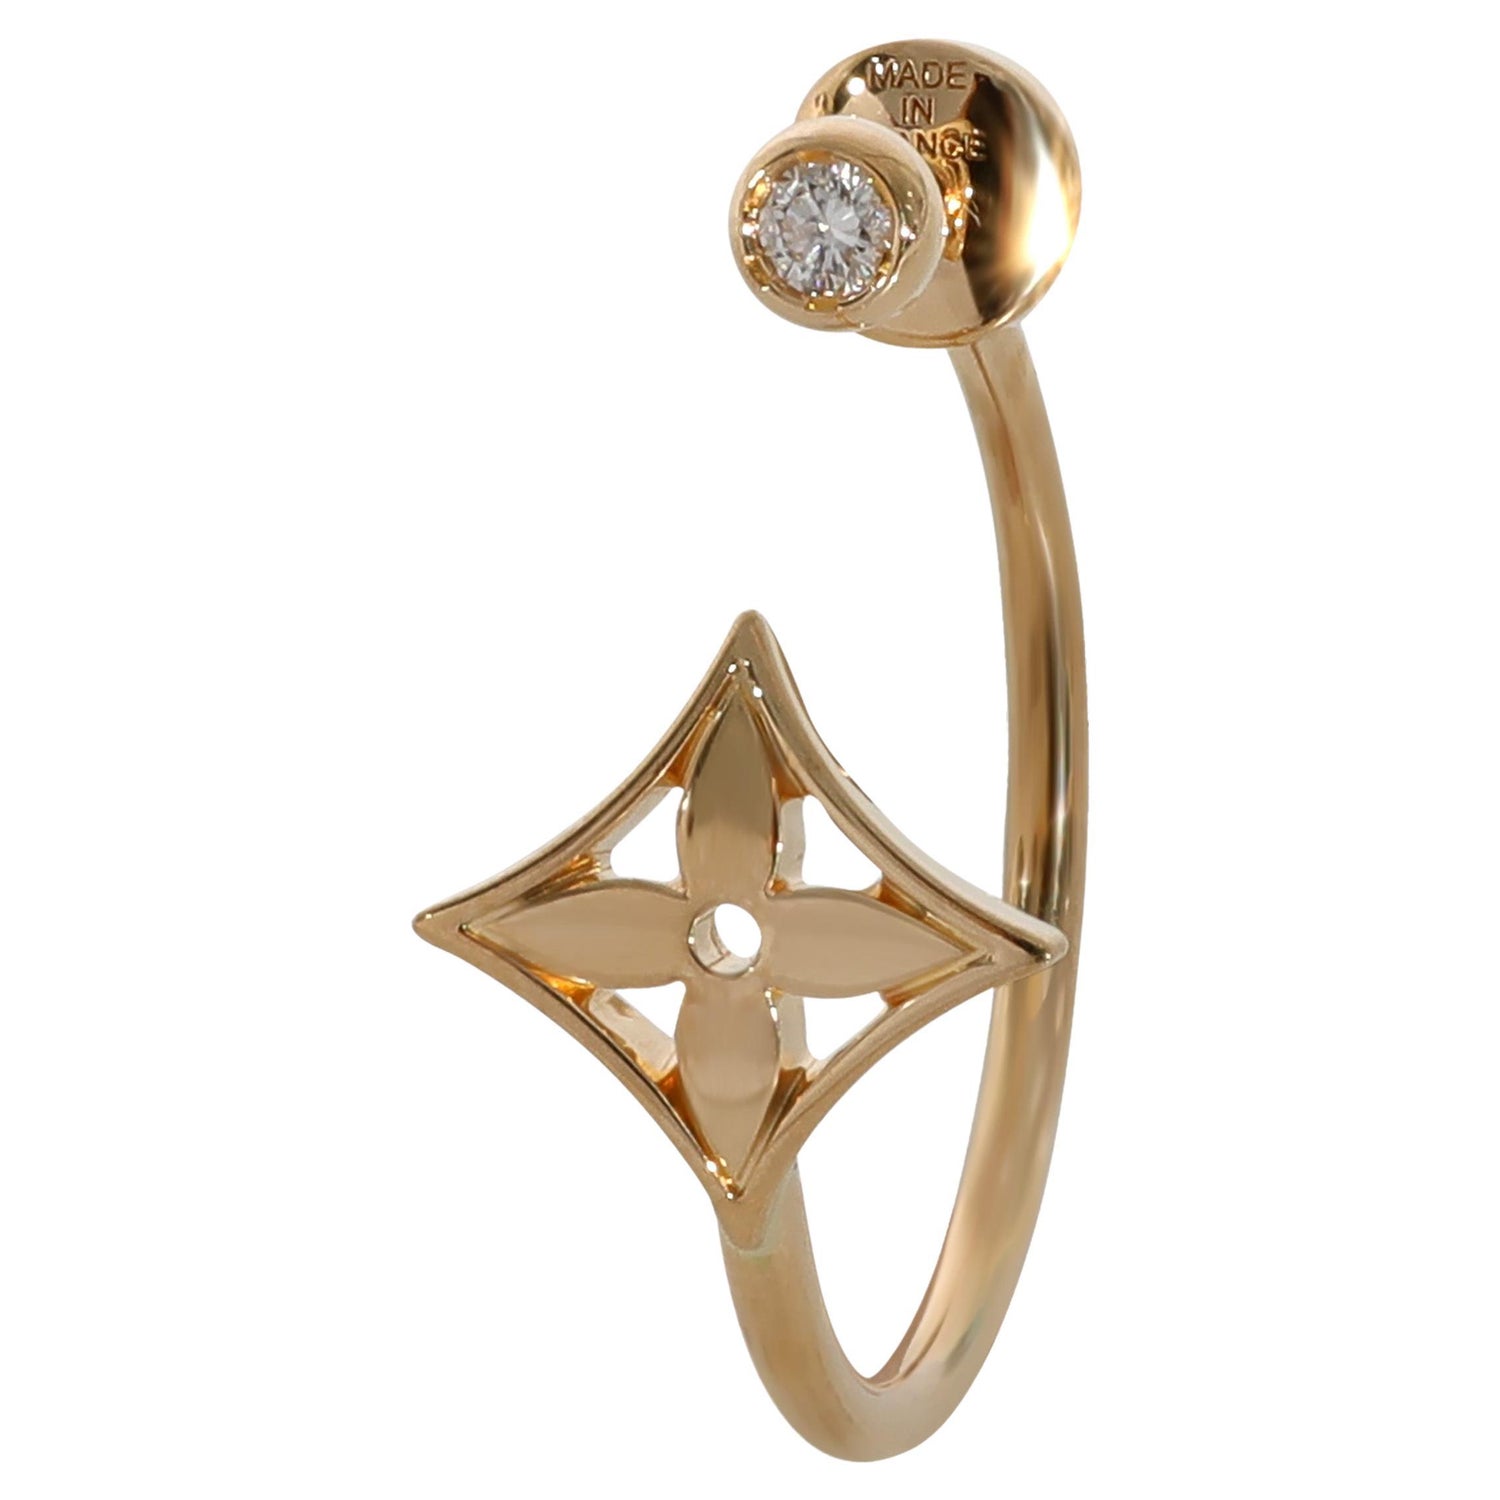 Idylle Blossom Paved Ring, 3 Golds And Diamonds - Jewelry - Categories